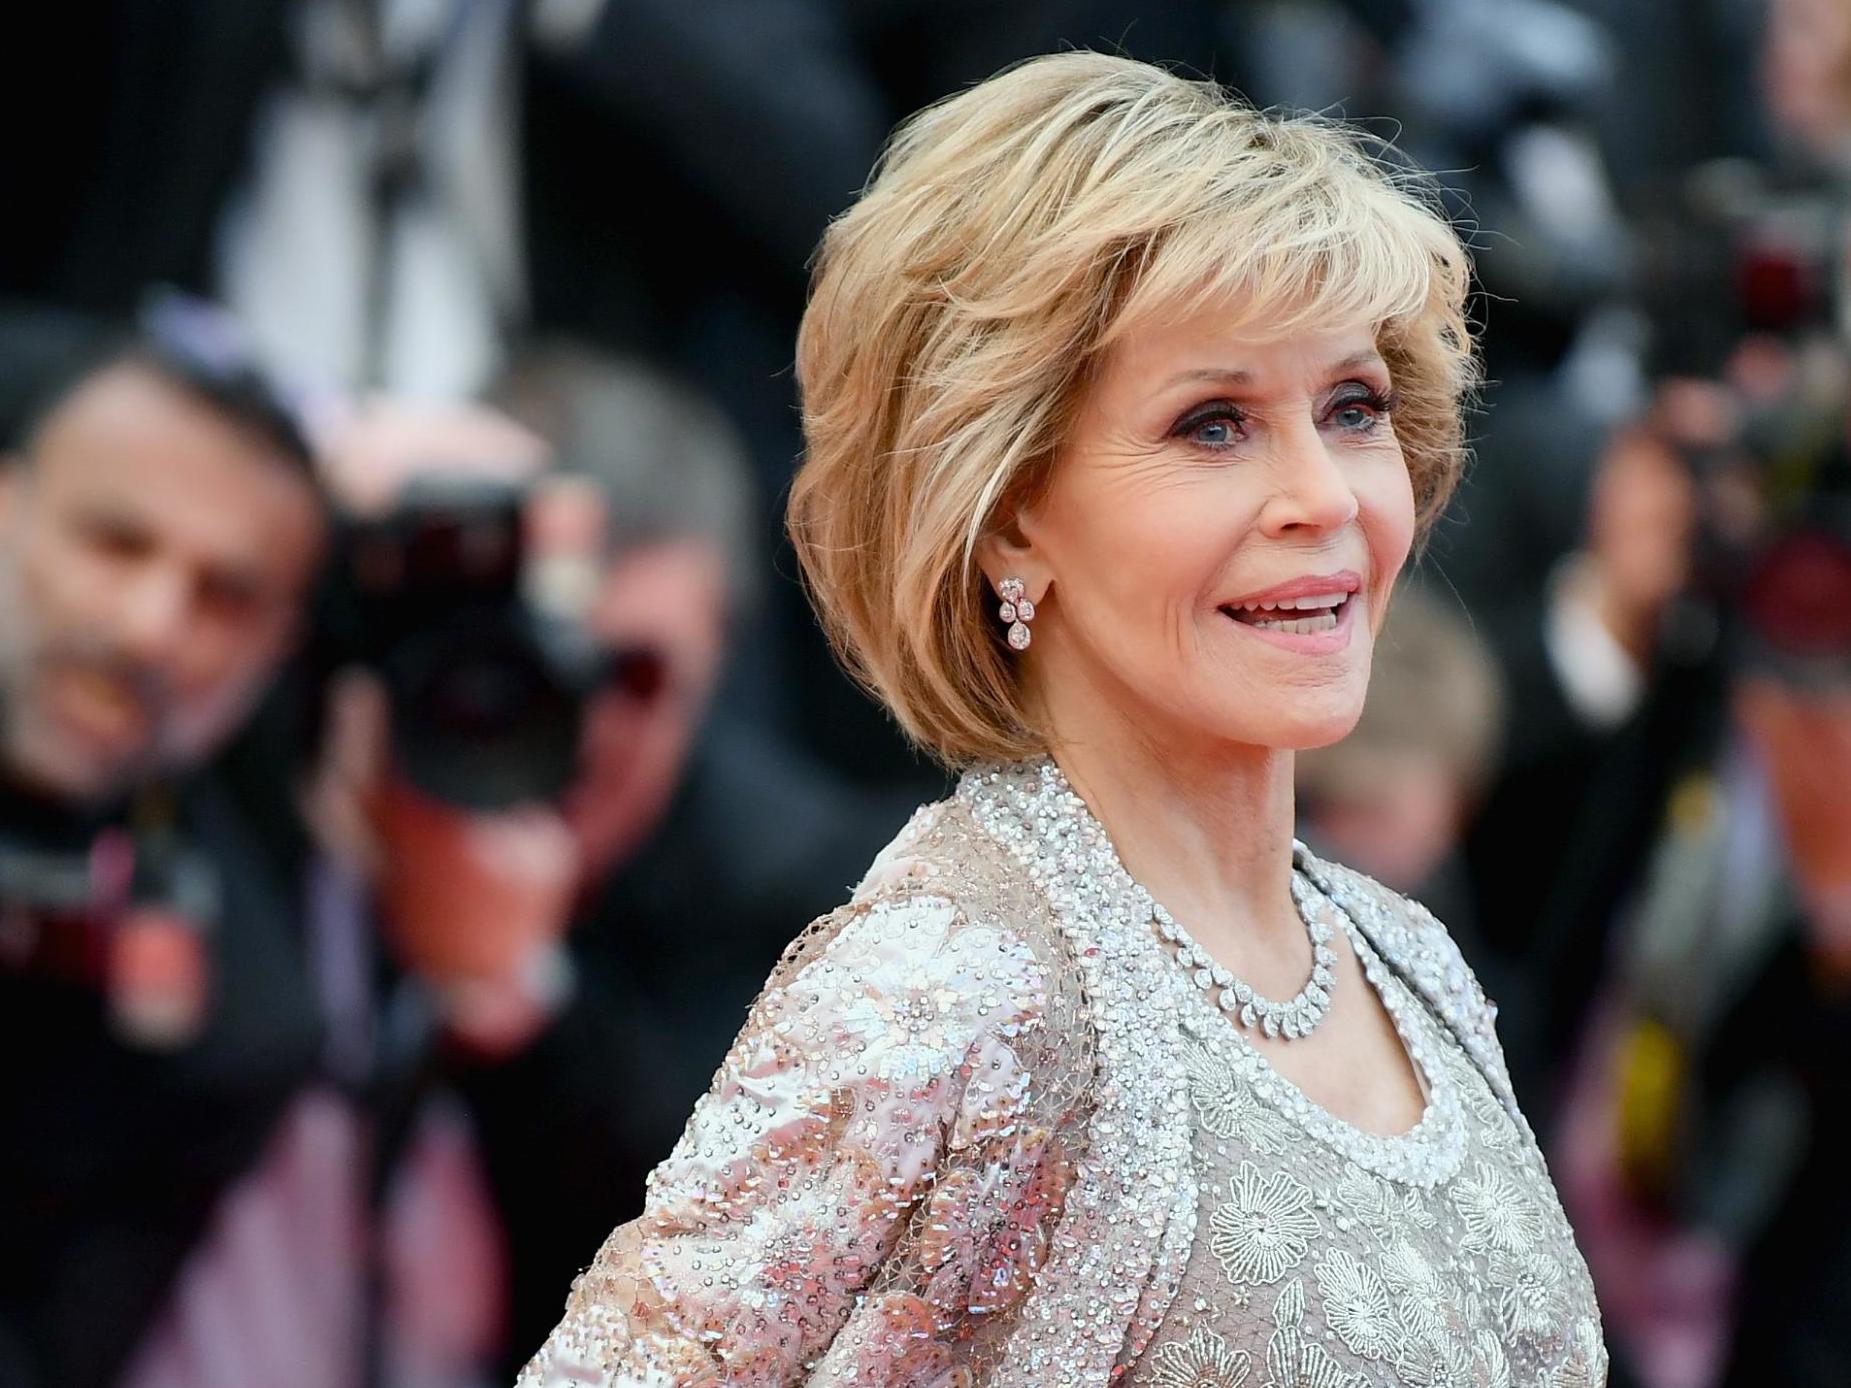 ‘Up until my sixties, I was to an extent, defined by the men in my life’ Fonda said